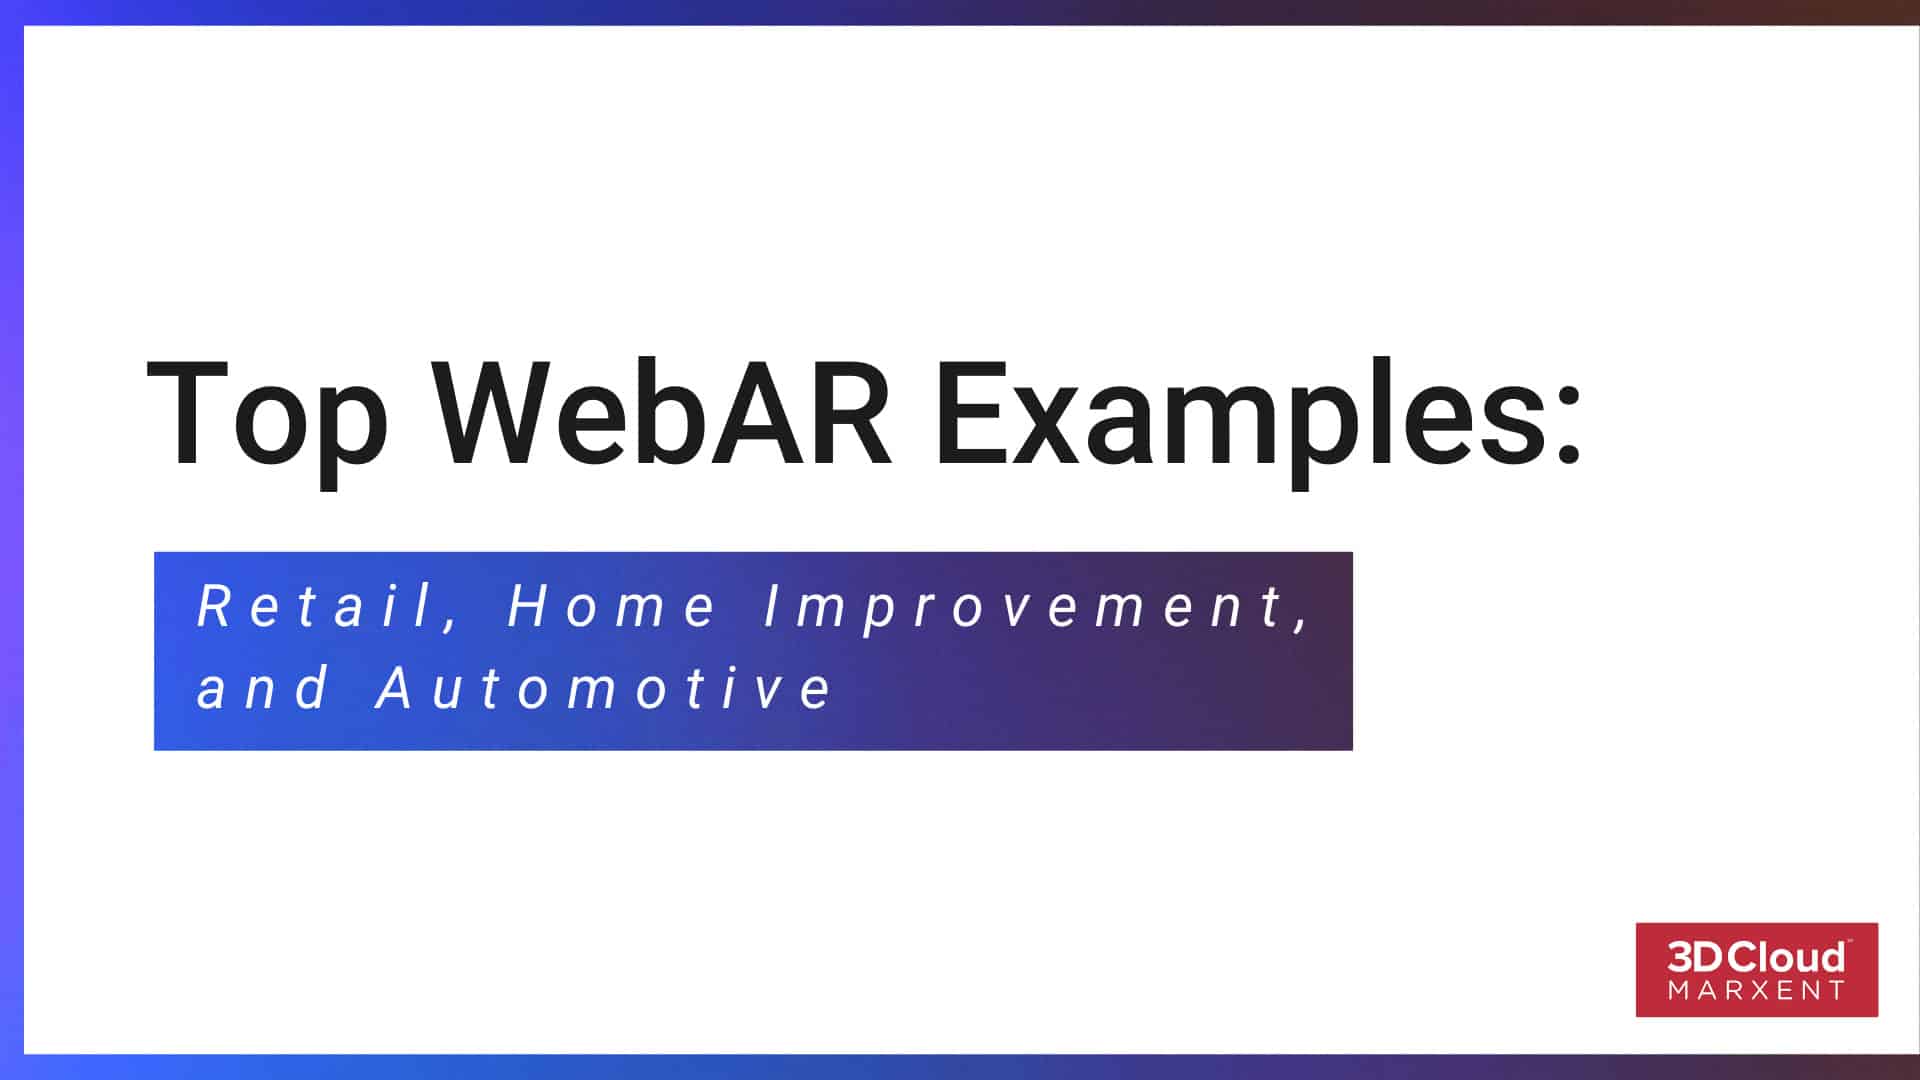 Top WebAR Examples: Retail, Home Improvement and Automotive